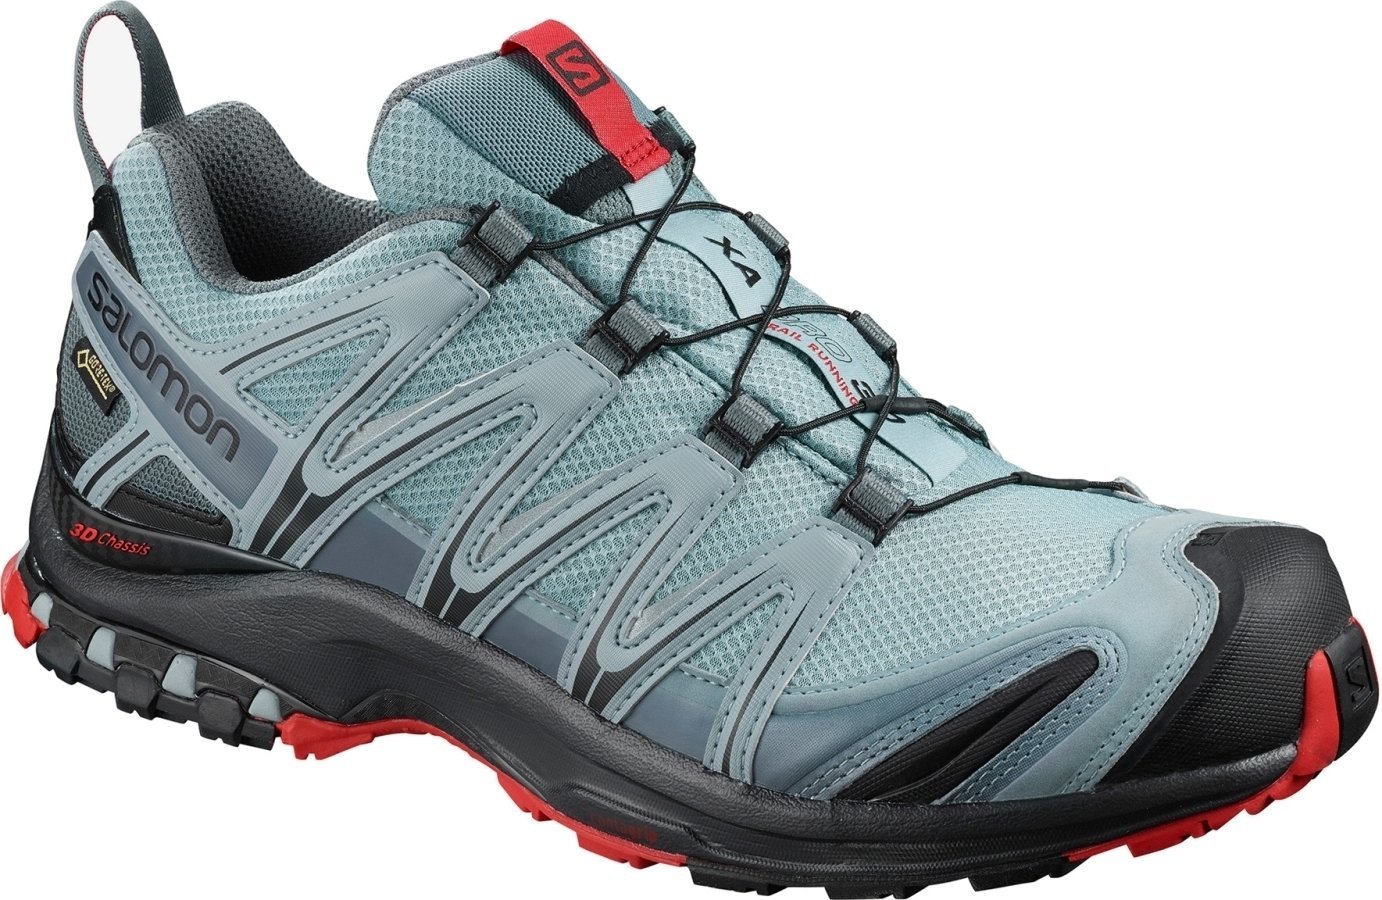 Chaussures outdoor hommes Salomon XA Pro 3D GTX Lead/Black/Barbados Cherry 44 2/3 Chaussures outdoor hommes